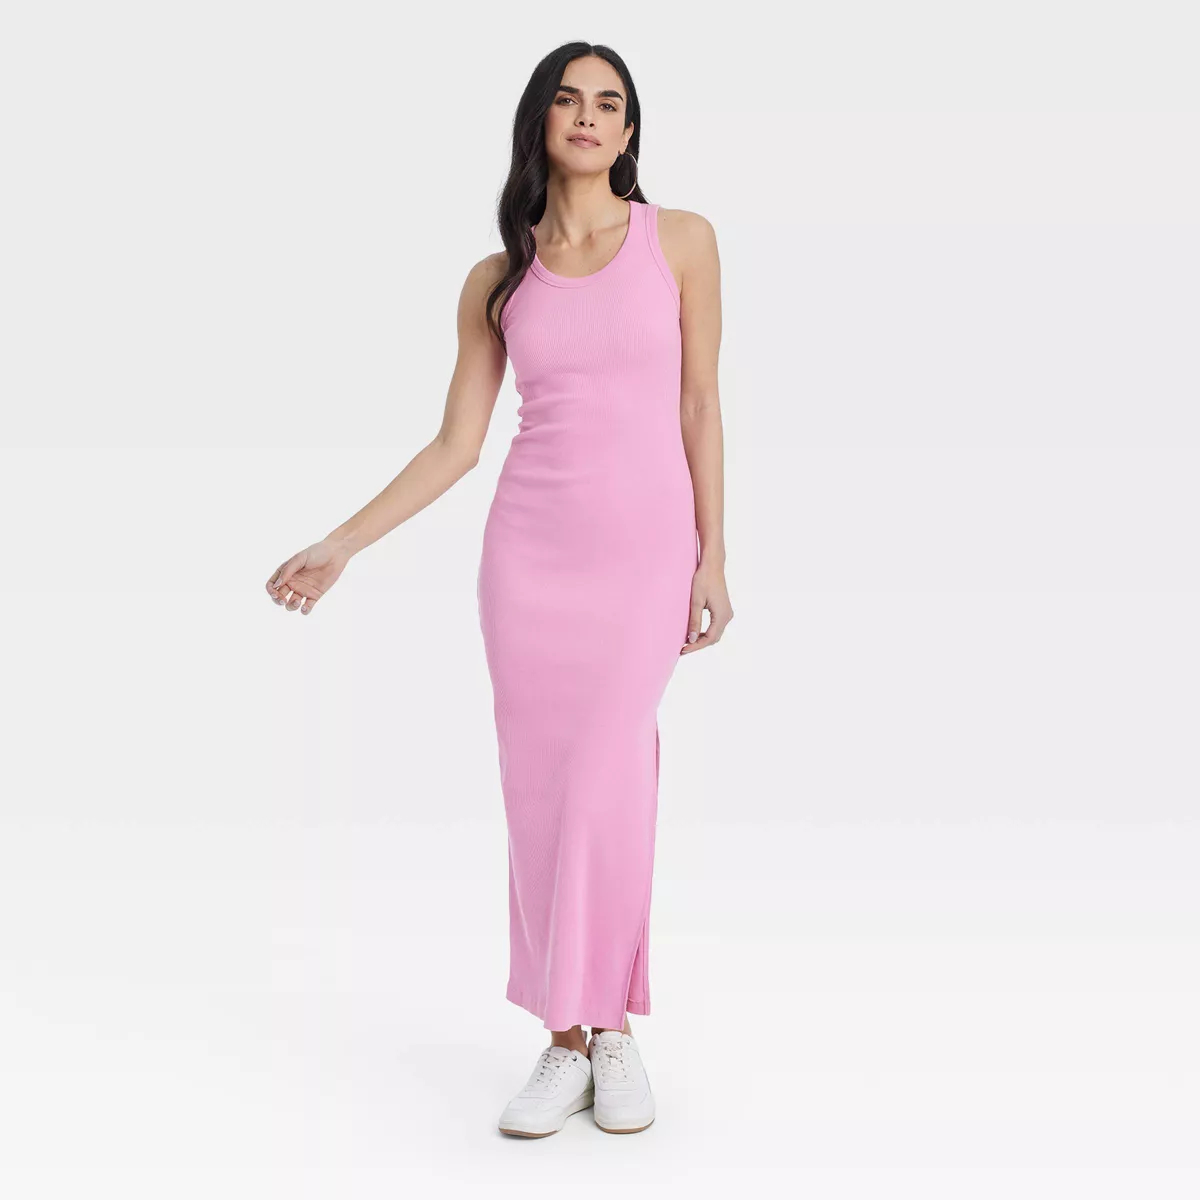 Model in a sleeveless pink dress standing with one hand stretched out, paired with white sneakers